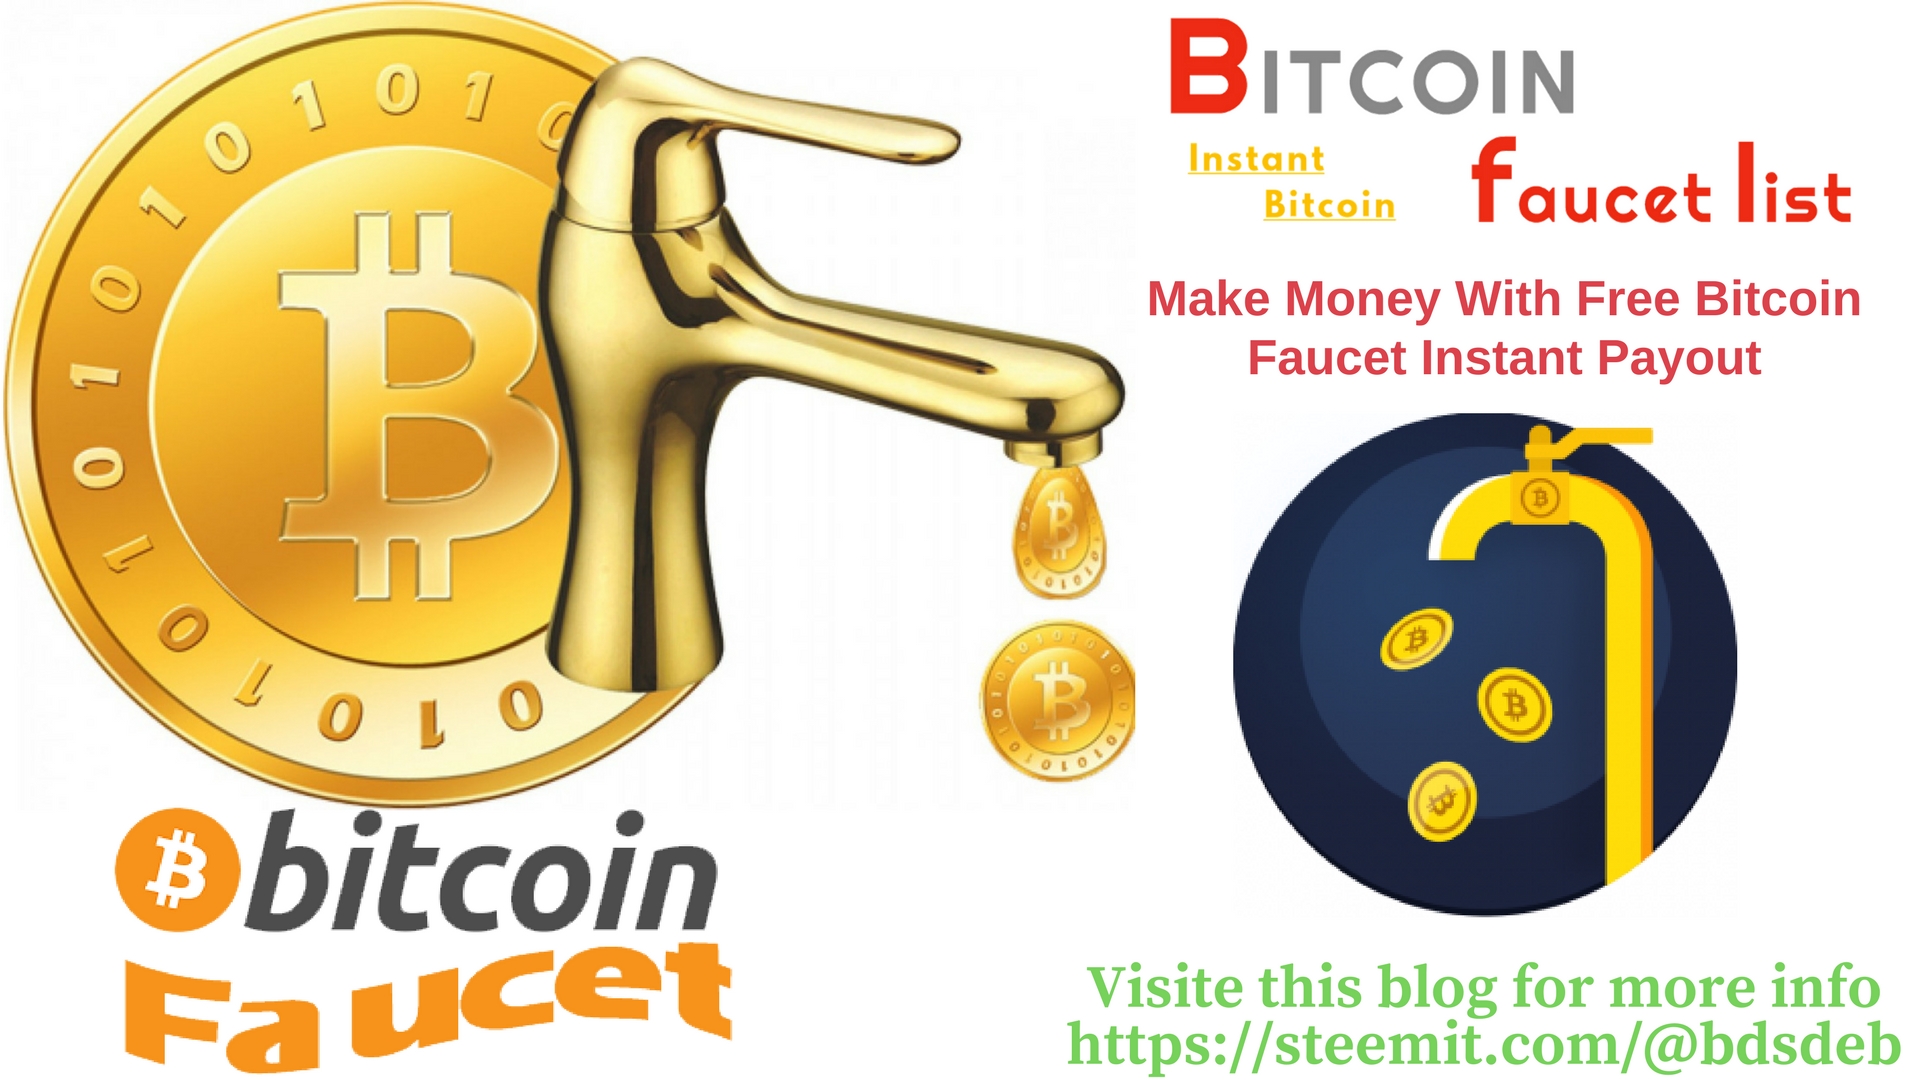 Free Bitcoin Faucet Instant Payout Best Bitcoin Faucet List Steemit - best bitcoin faucet list jpg